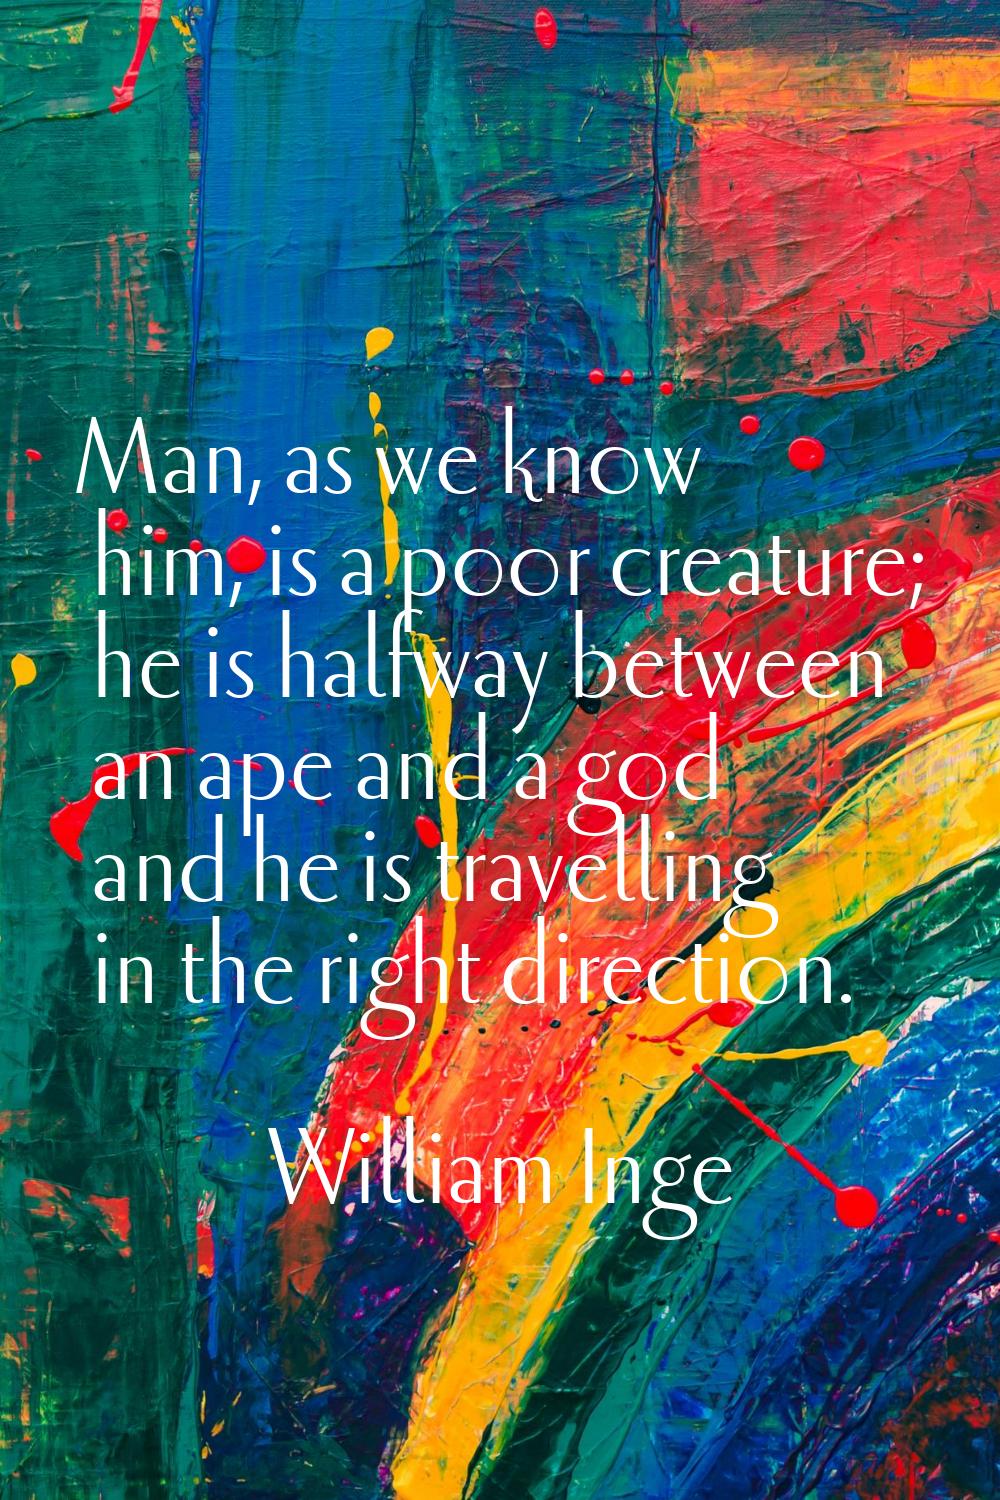 Man, as we know him, is a poor creature; he is halfway between an ape and a god and he is travellin